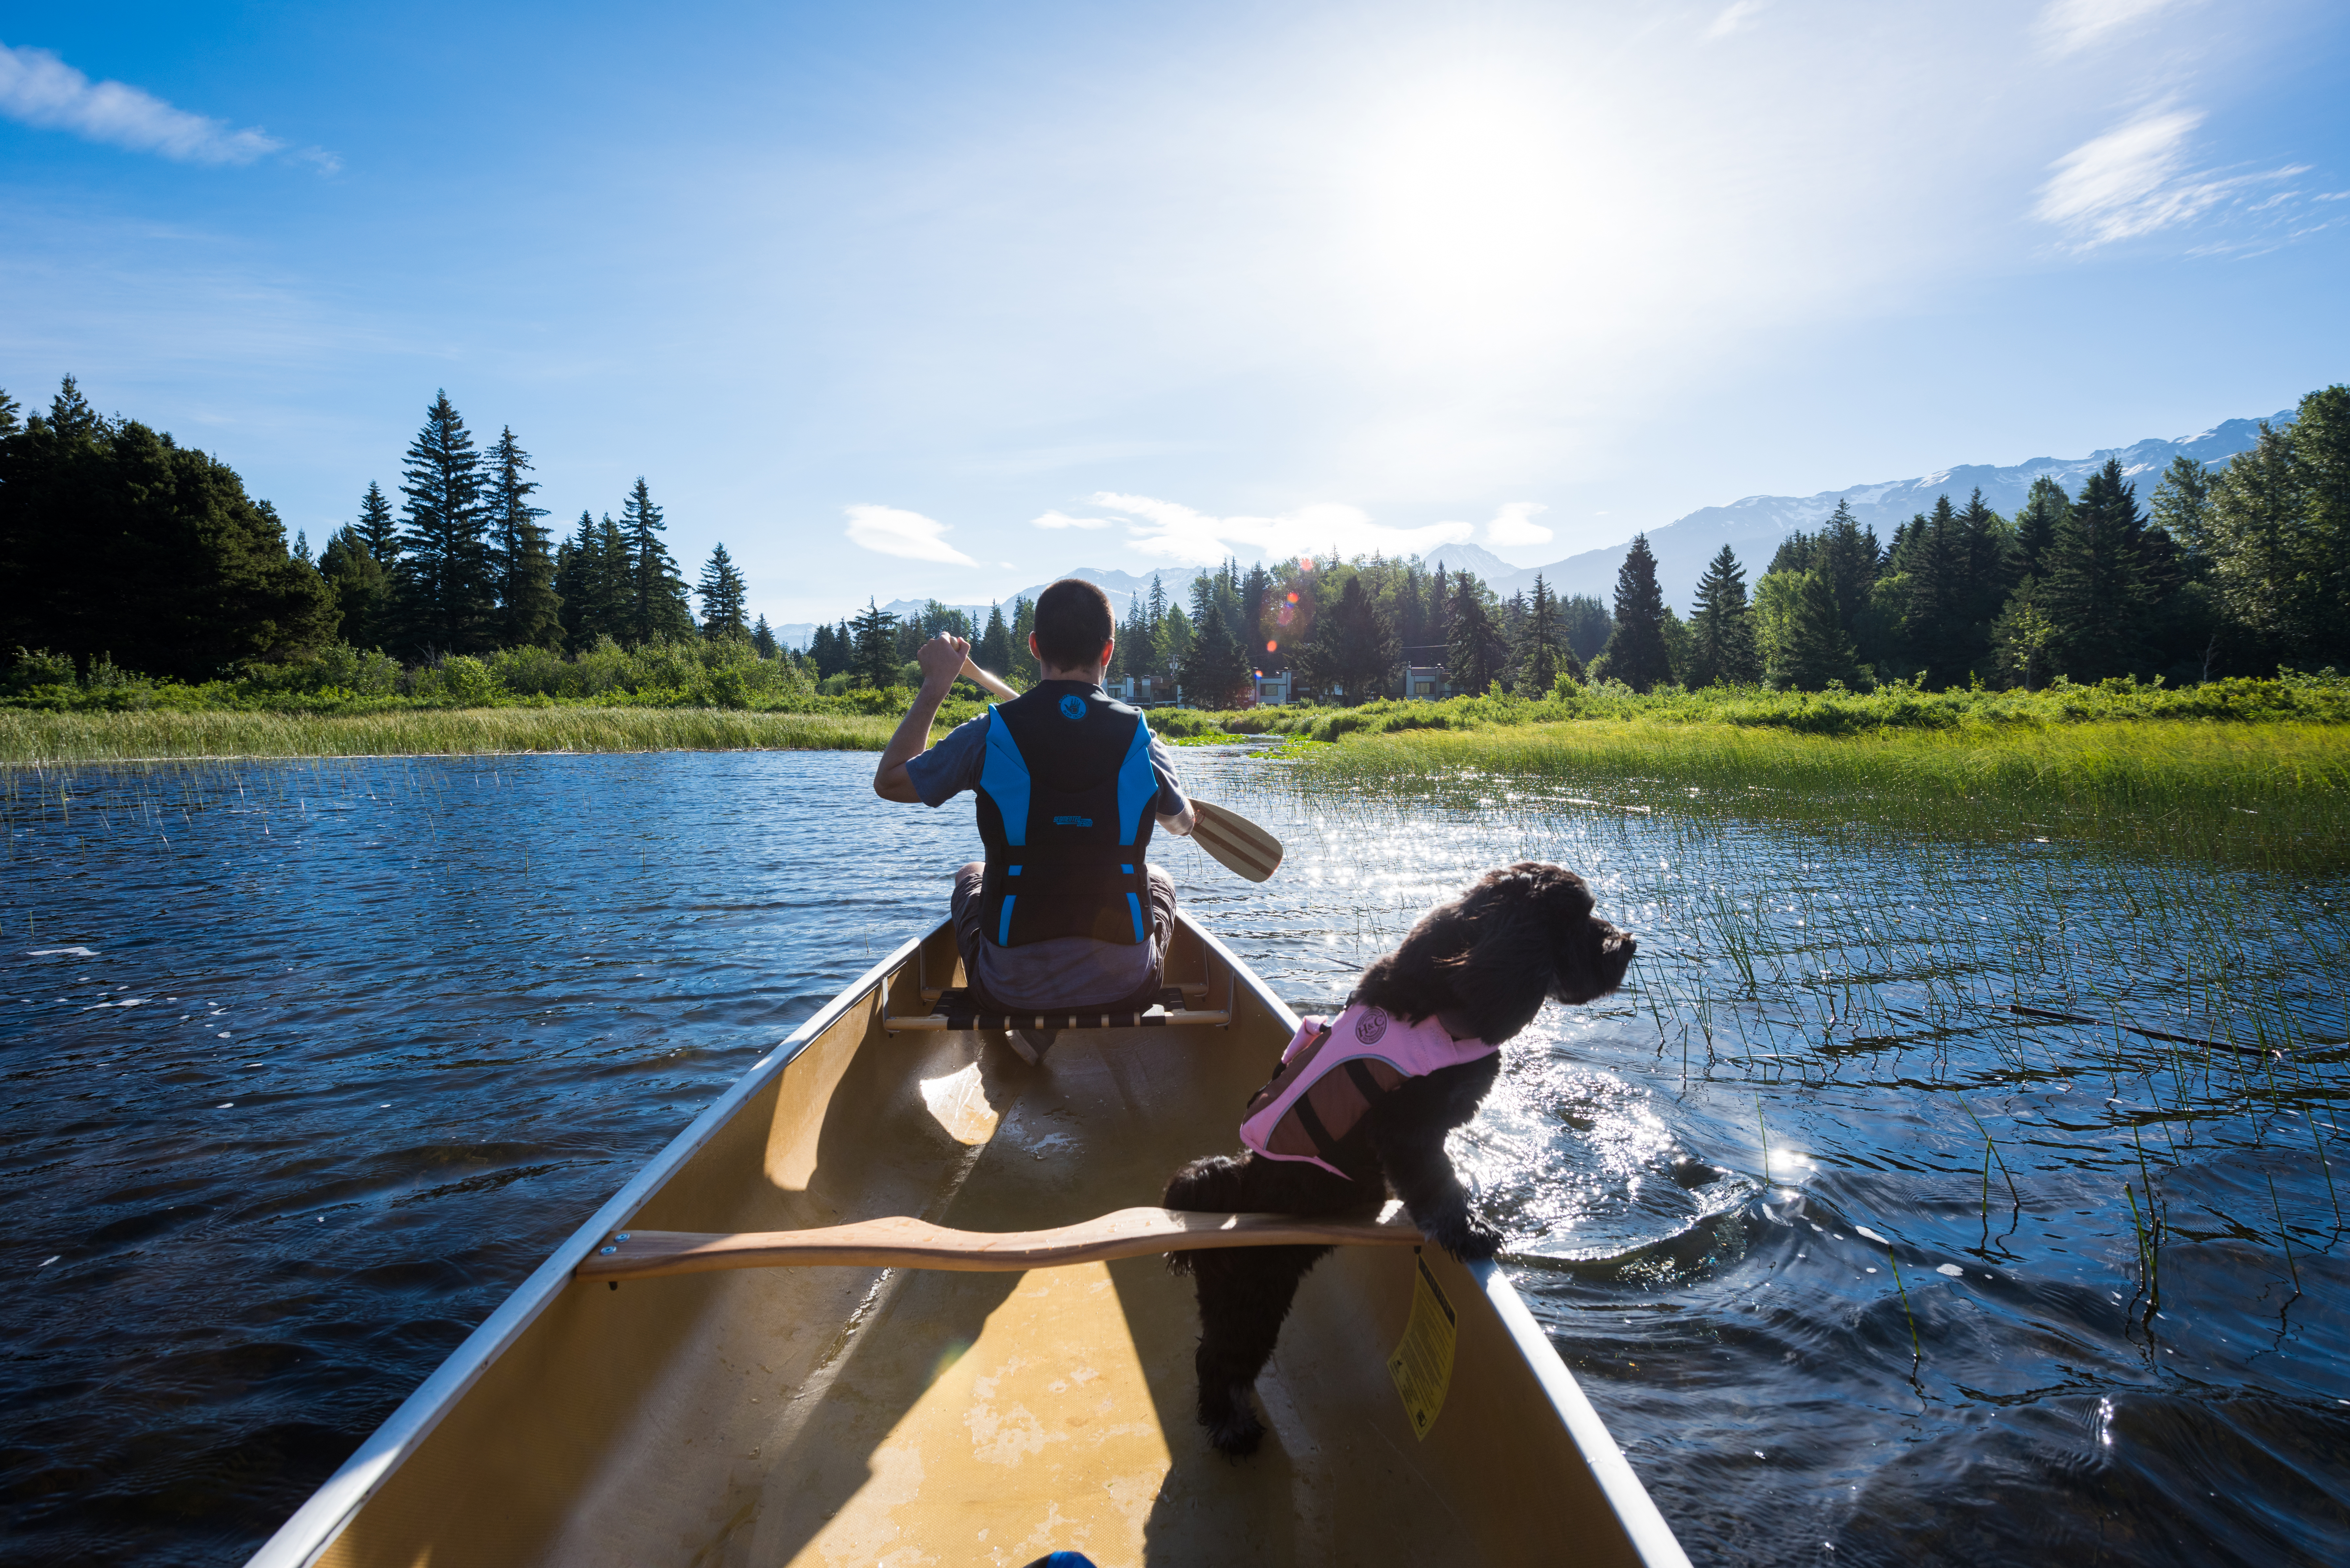 Whistler in the summer: man in a Canadian canoe on a lake with dog.